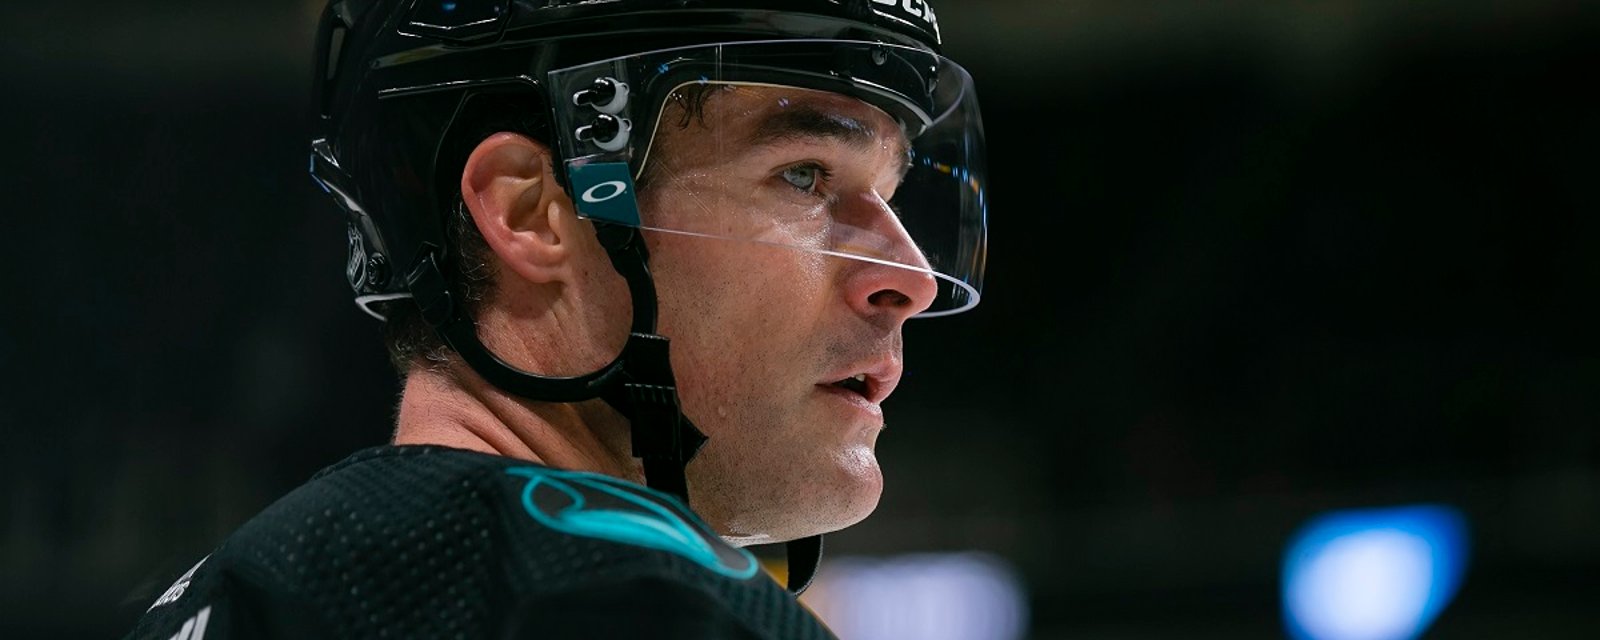 Patrick Marleau has just been traded!